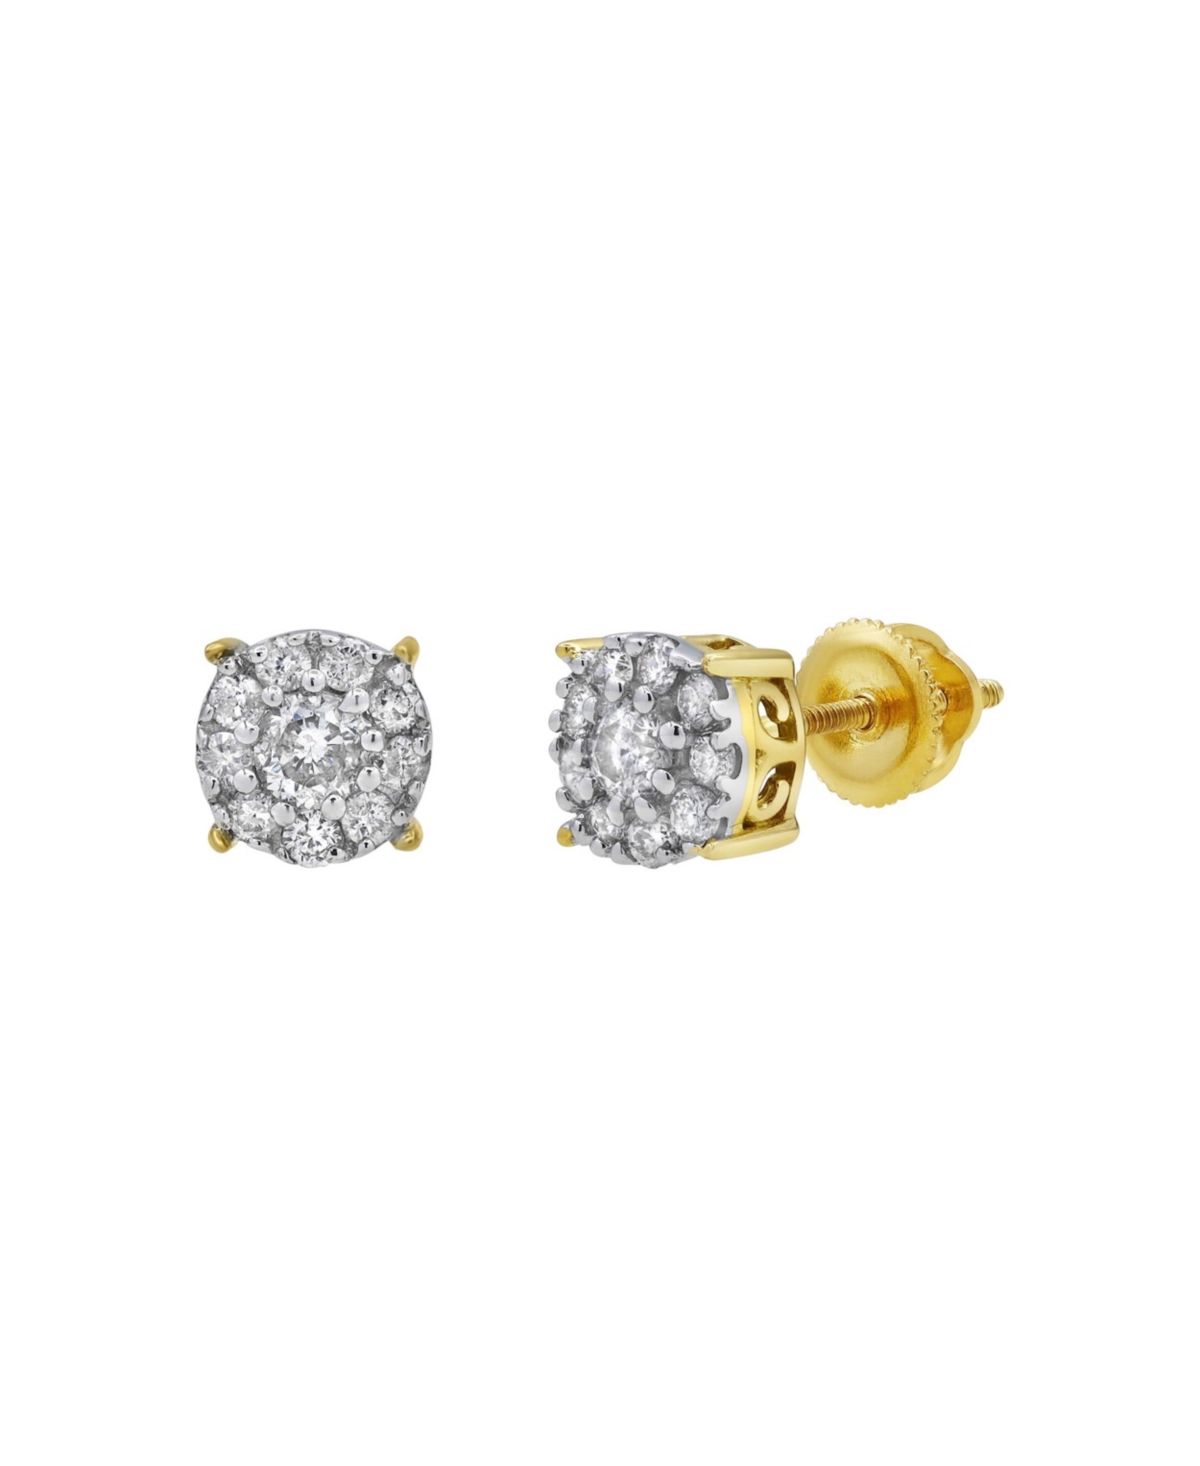 Ice Cold 14k Yellow Gold 0.32 cttw Certified Natural Diamond Stud Earring for Men/Women, Screw Back - Yellow